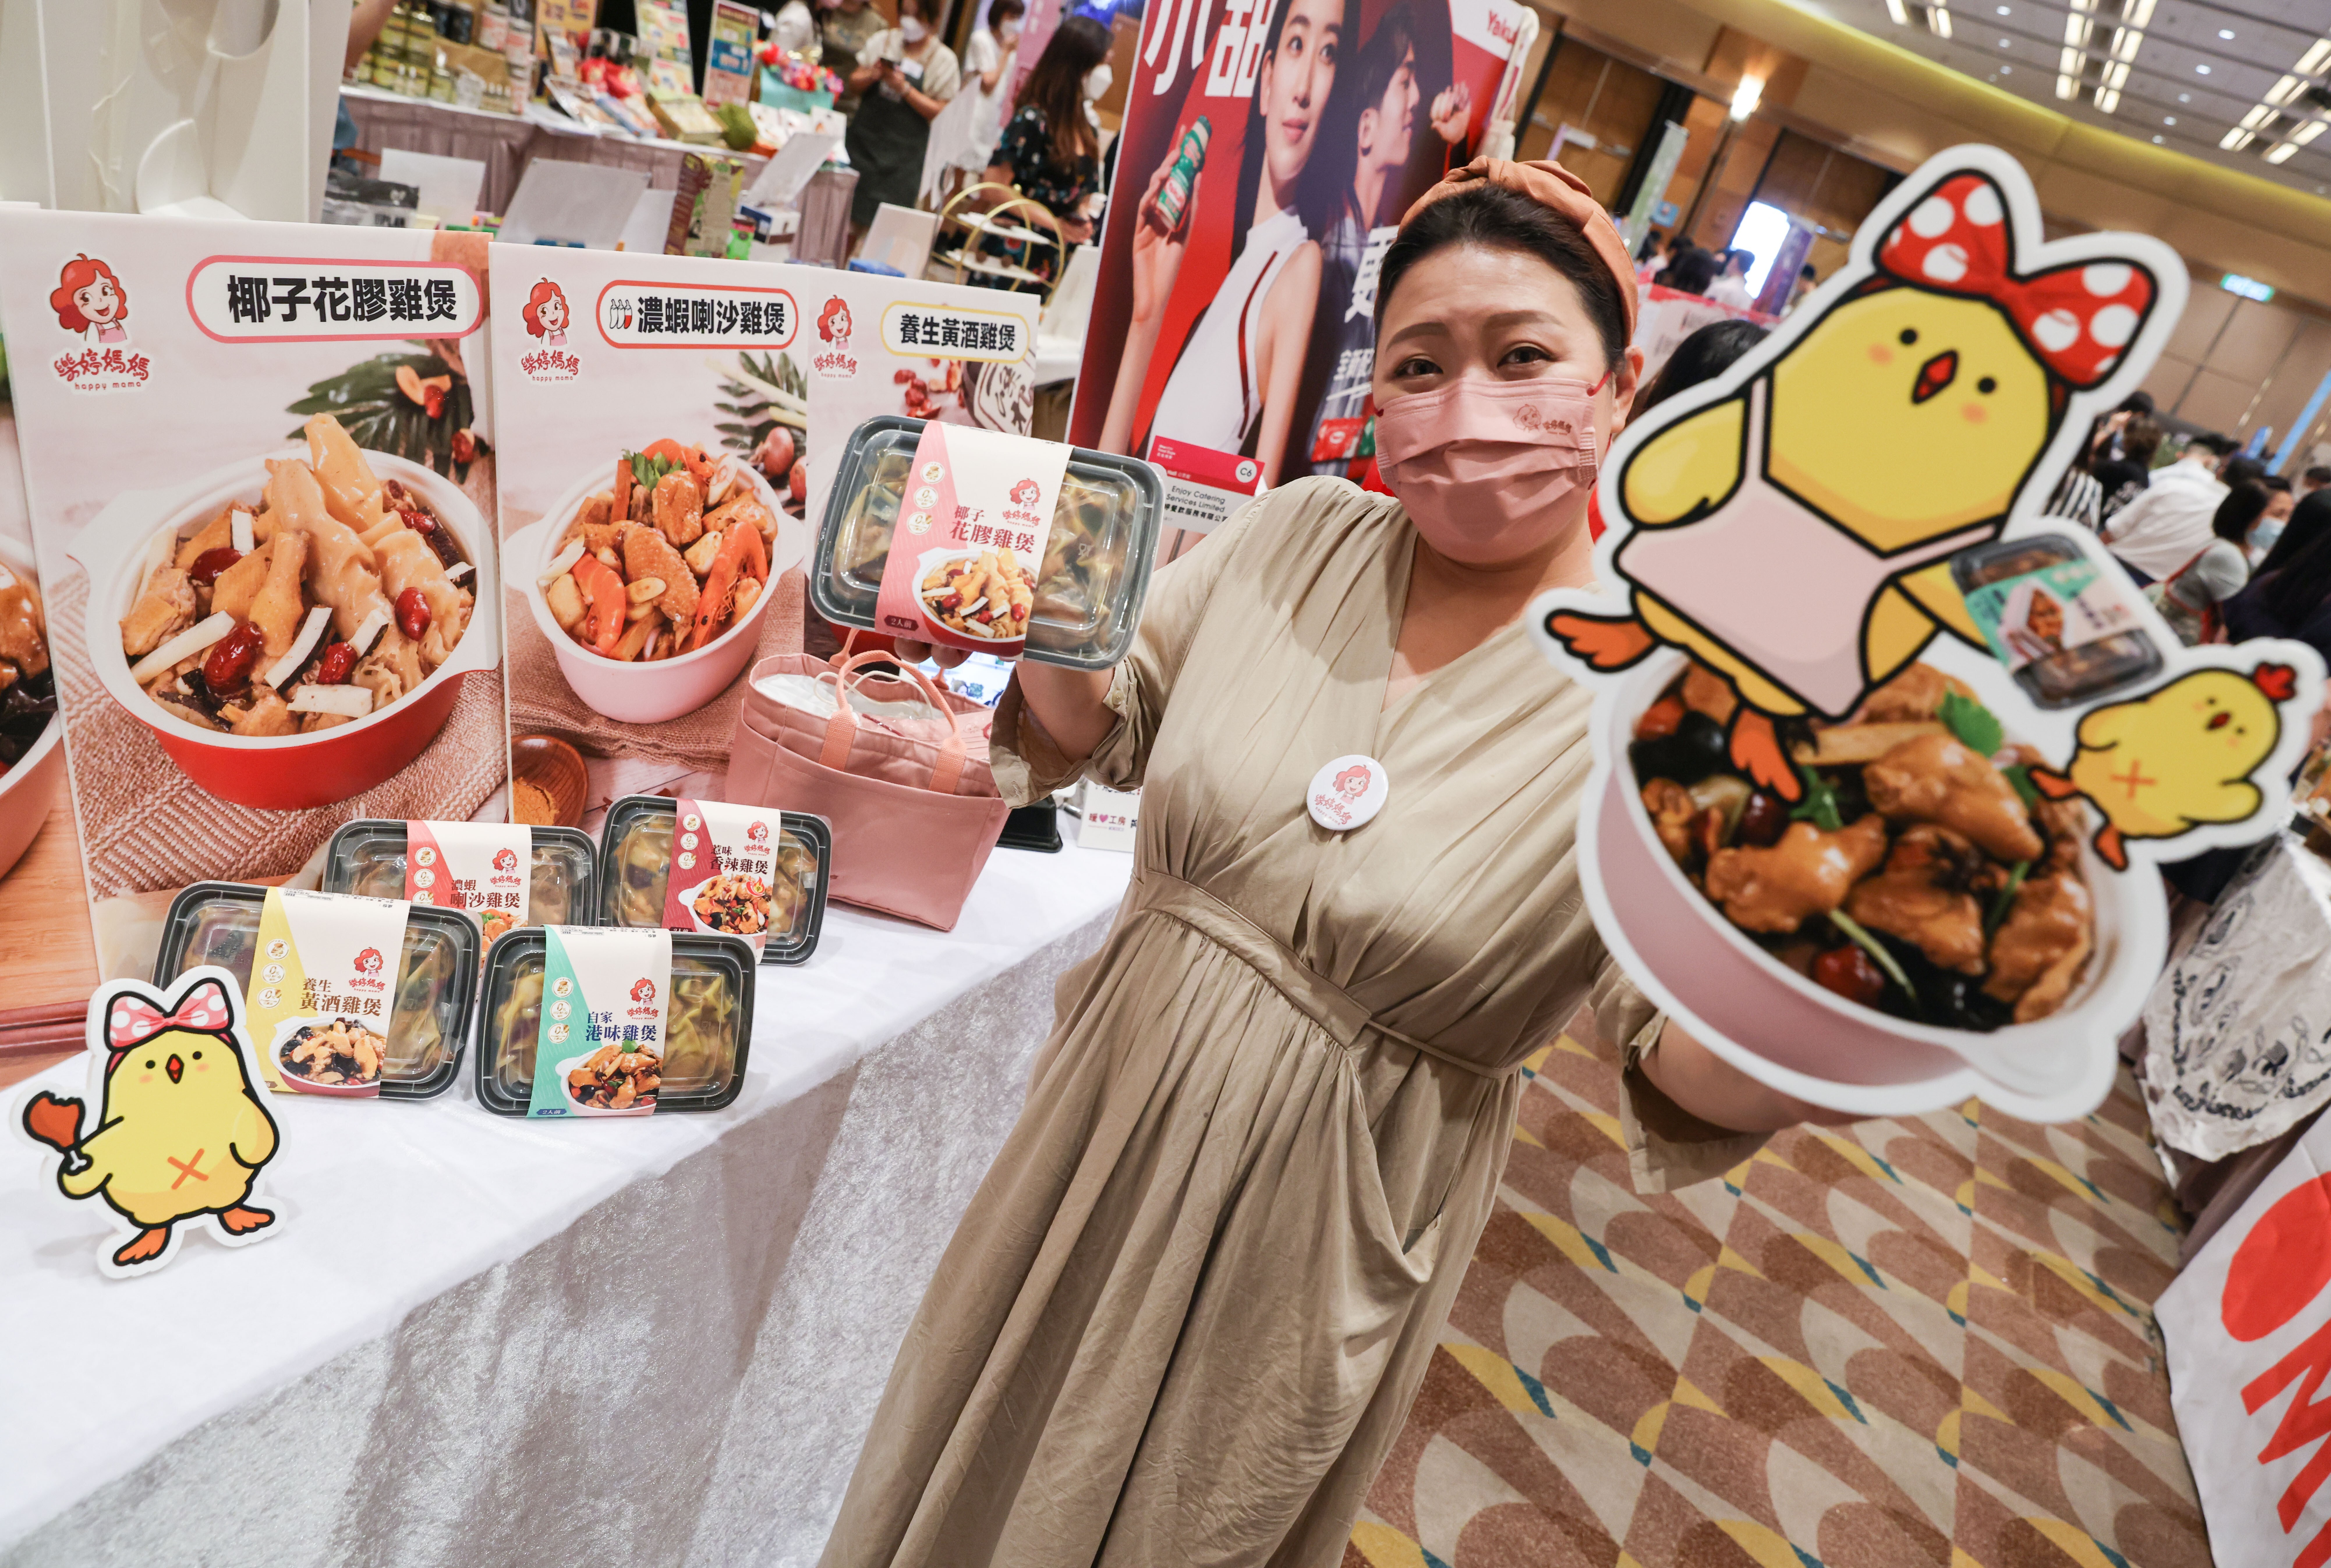 Many vendors, such as Happy Mama founder Jessica Leung, will be enticing shoppers with limited offers when the Hong Kong Food Expo kicks off next week. Photo: May Tse